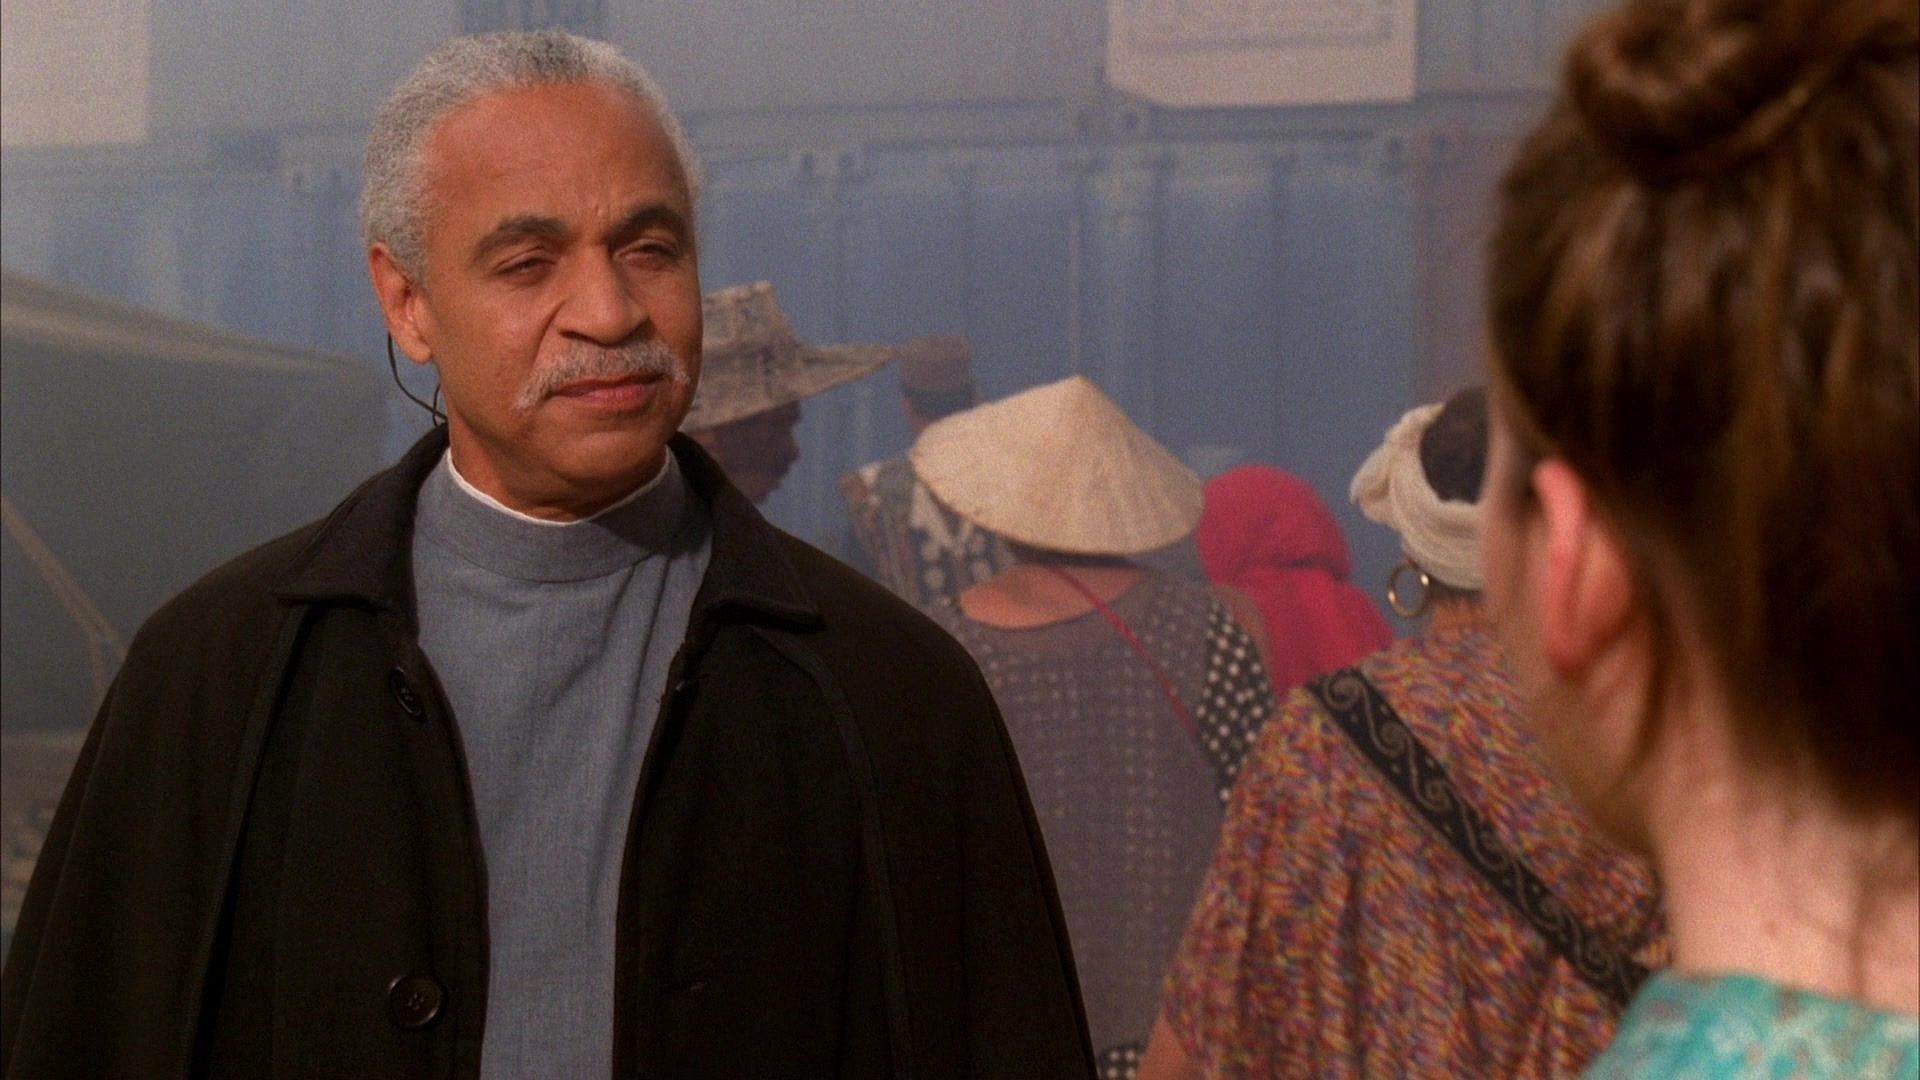 Shepherd Book (Ron Glass) meets Kaylee Frye (Jewel Staite) in the Firefly episode ‘Serenity’. The two are outside in a busy market setting.